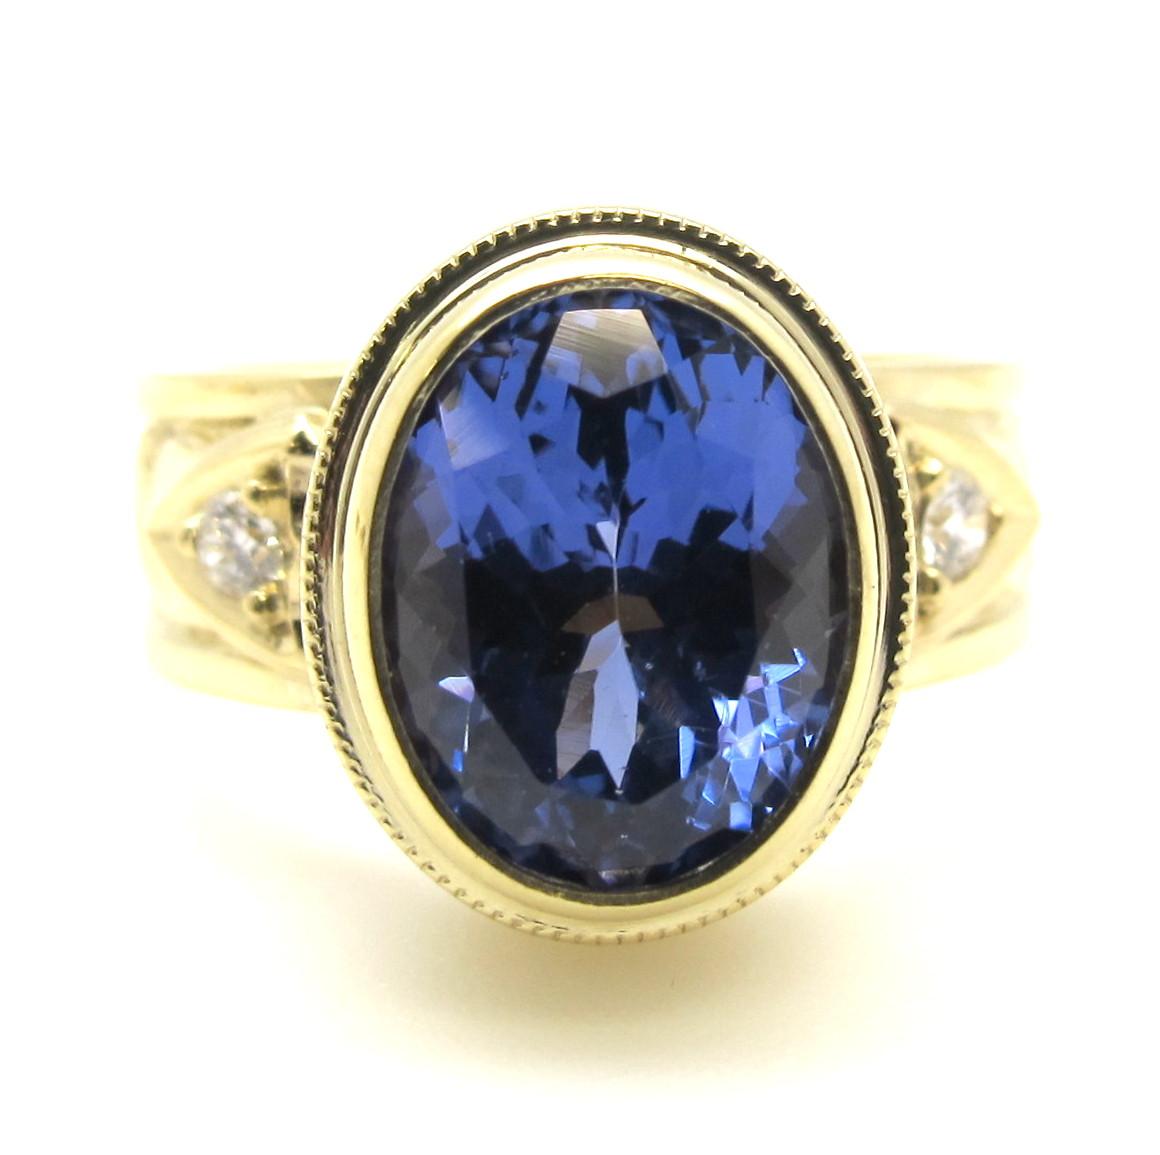 This ring features a beautiful, violetish-blue tanzanite, measuring 10.00 x 7.50mm and weighing 2.98 carats. It is bezel set in a handmade, 18k yellow gold setting, made by our Master Jewelers in Los Angeles. The attention to detail and level of